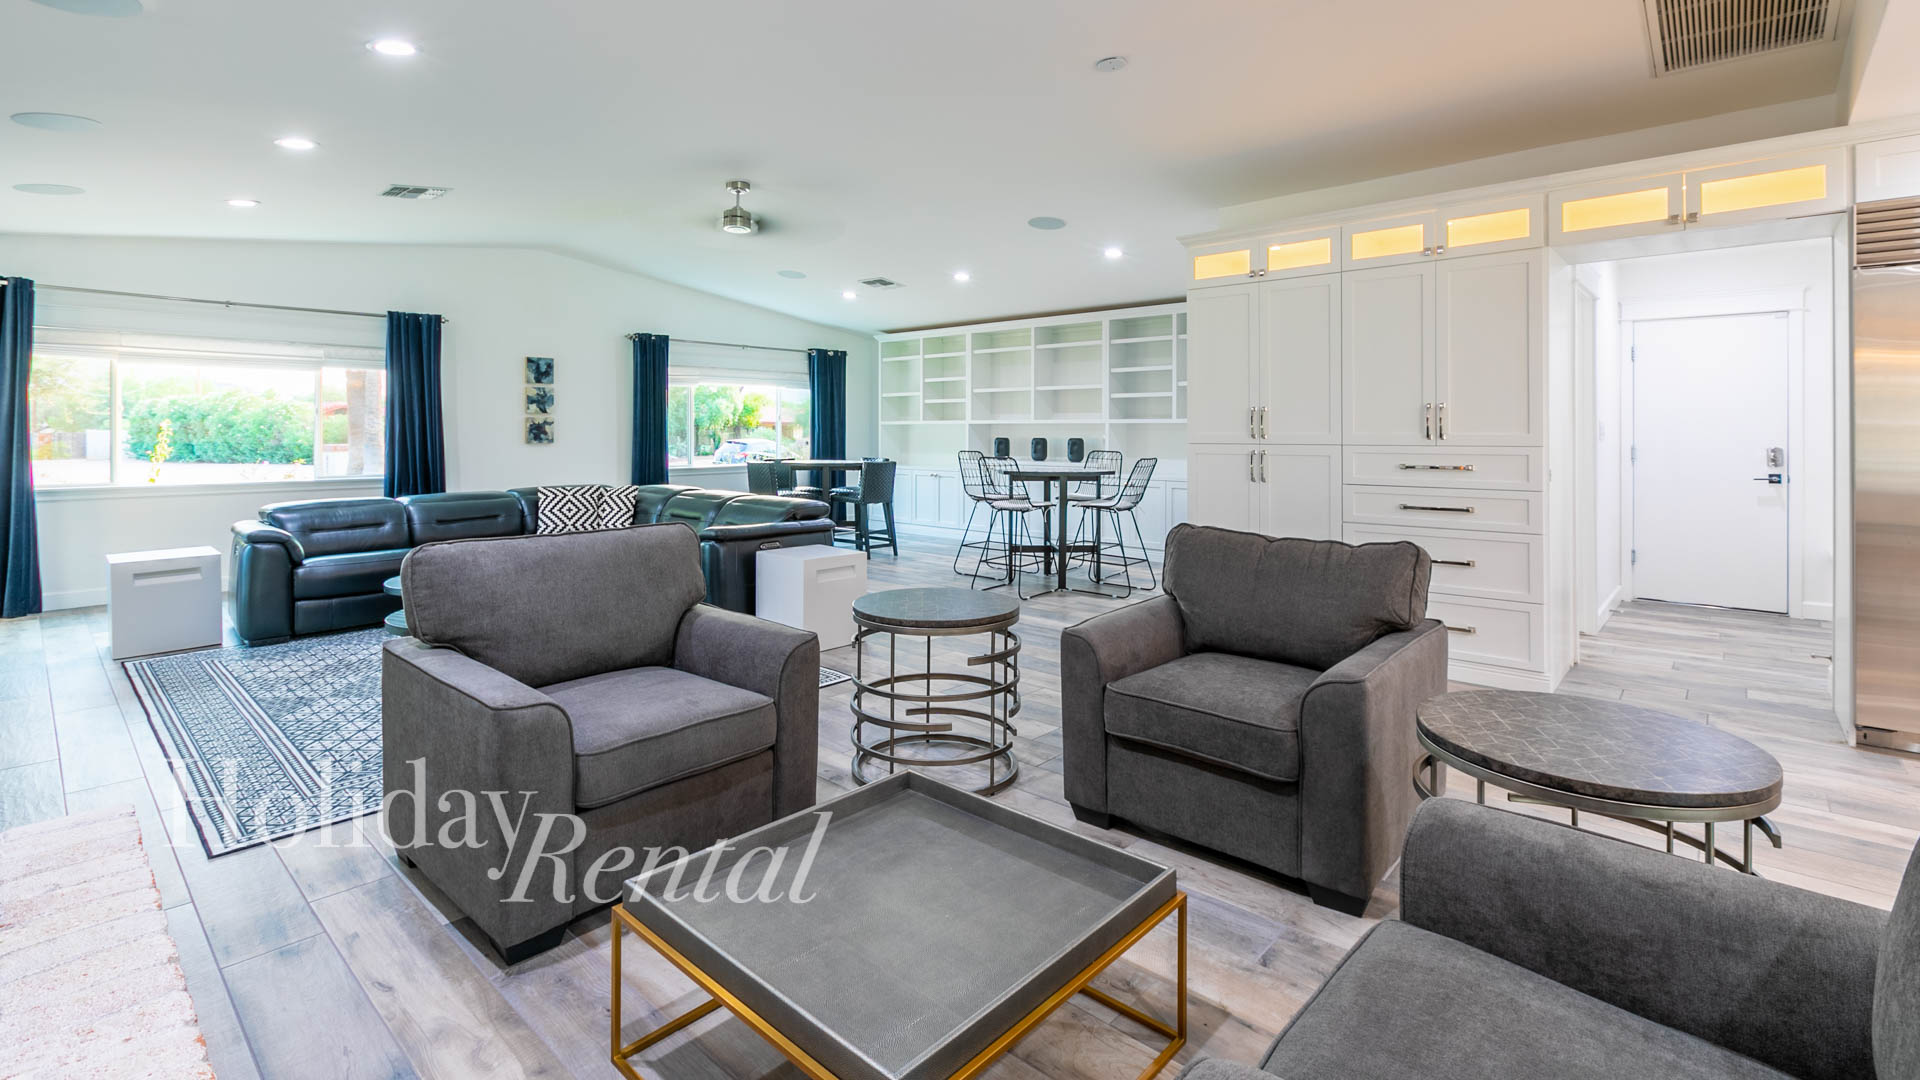 Sinking into luxurious comfort in the grand living room, featuring ample seating for all to relax in style